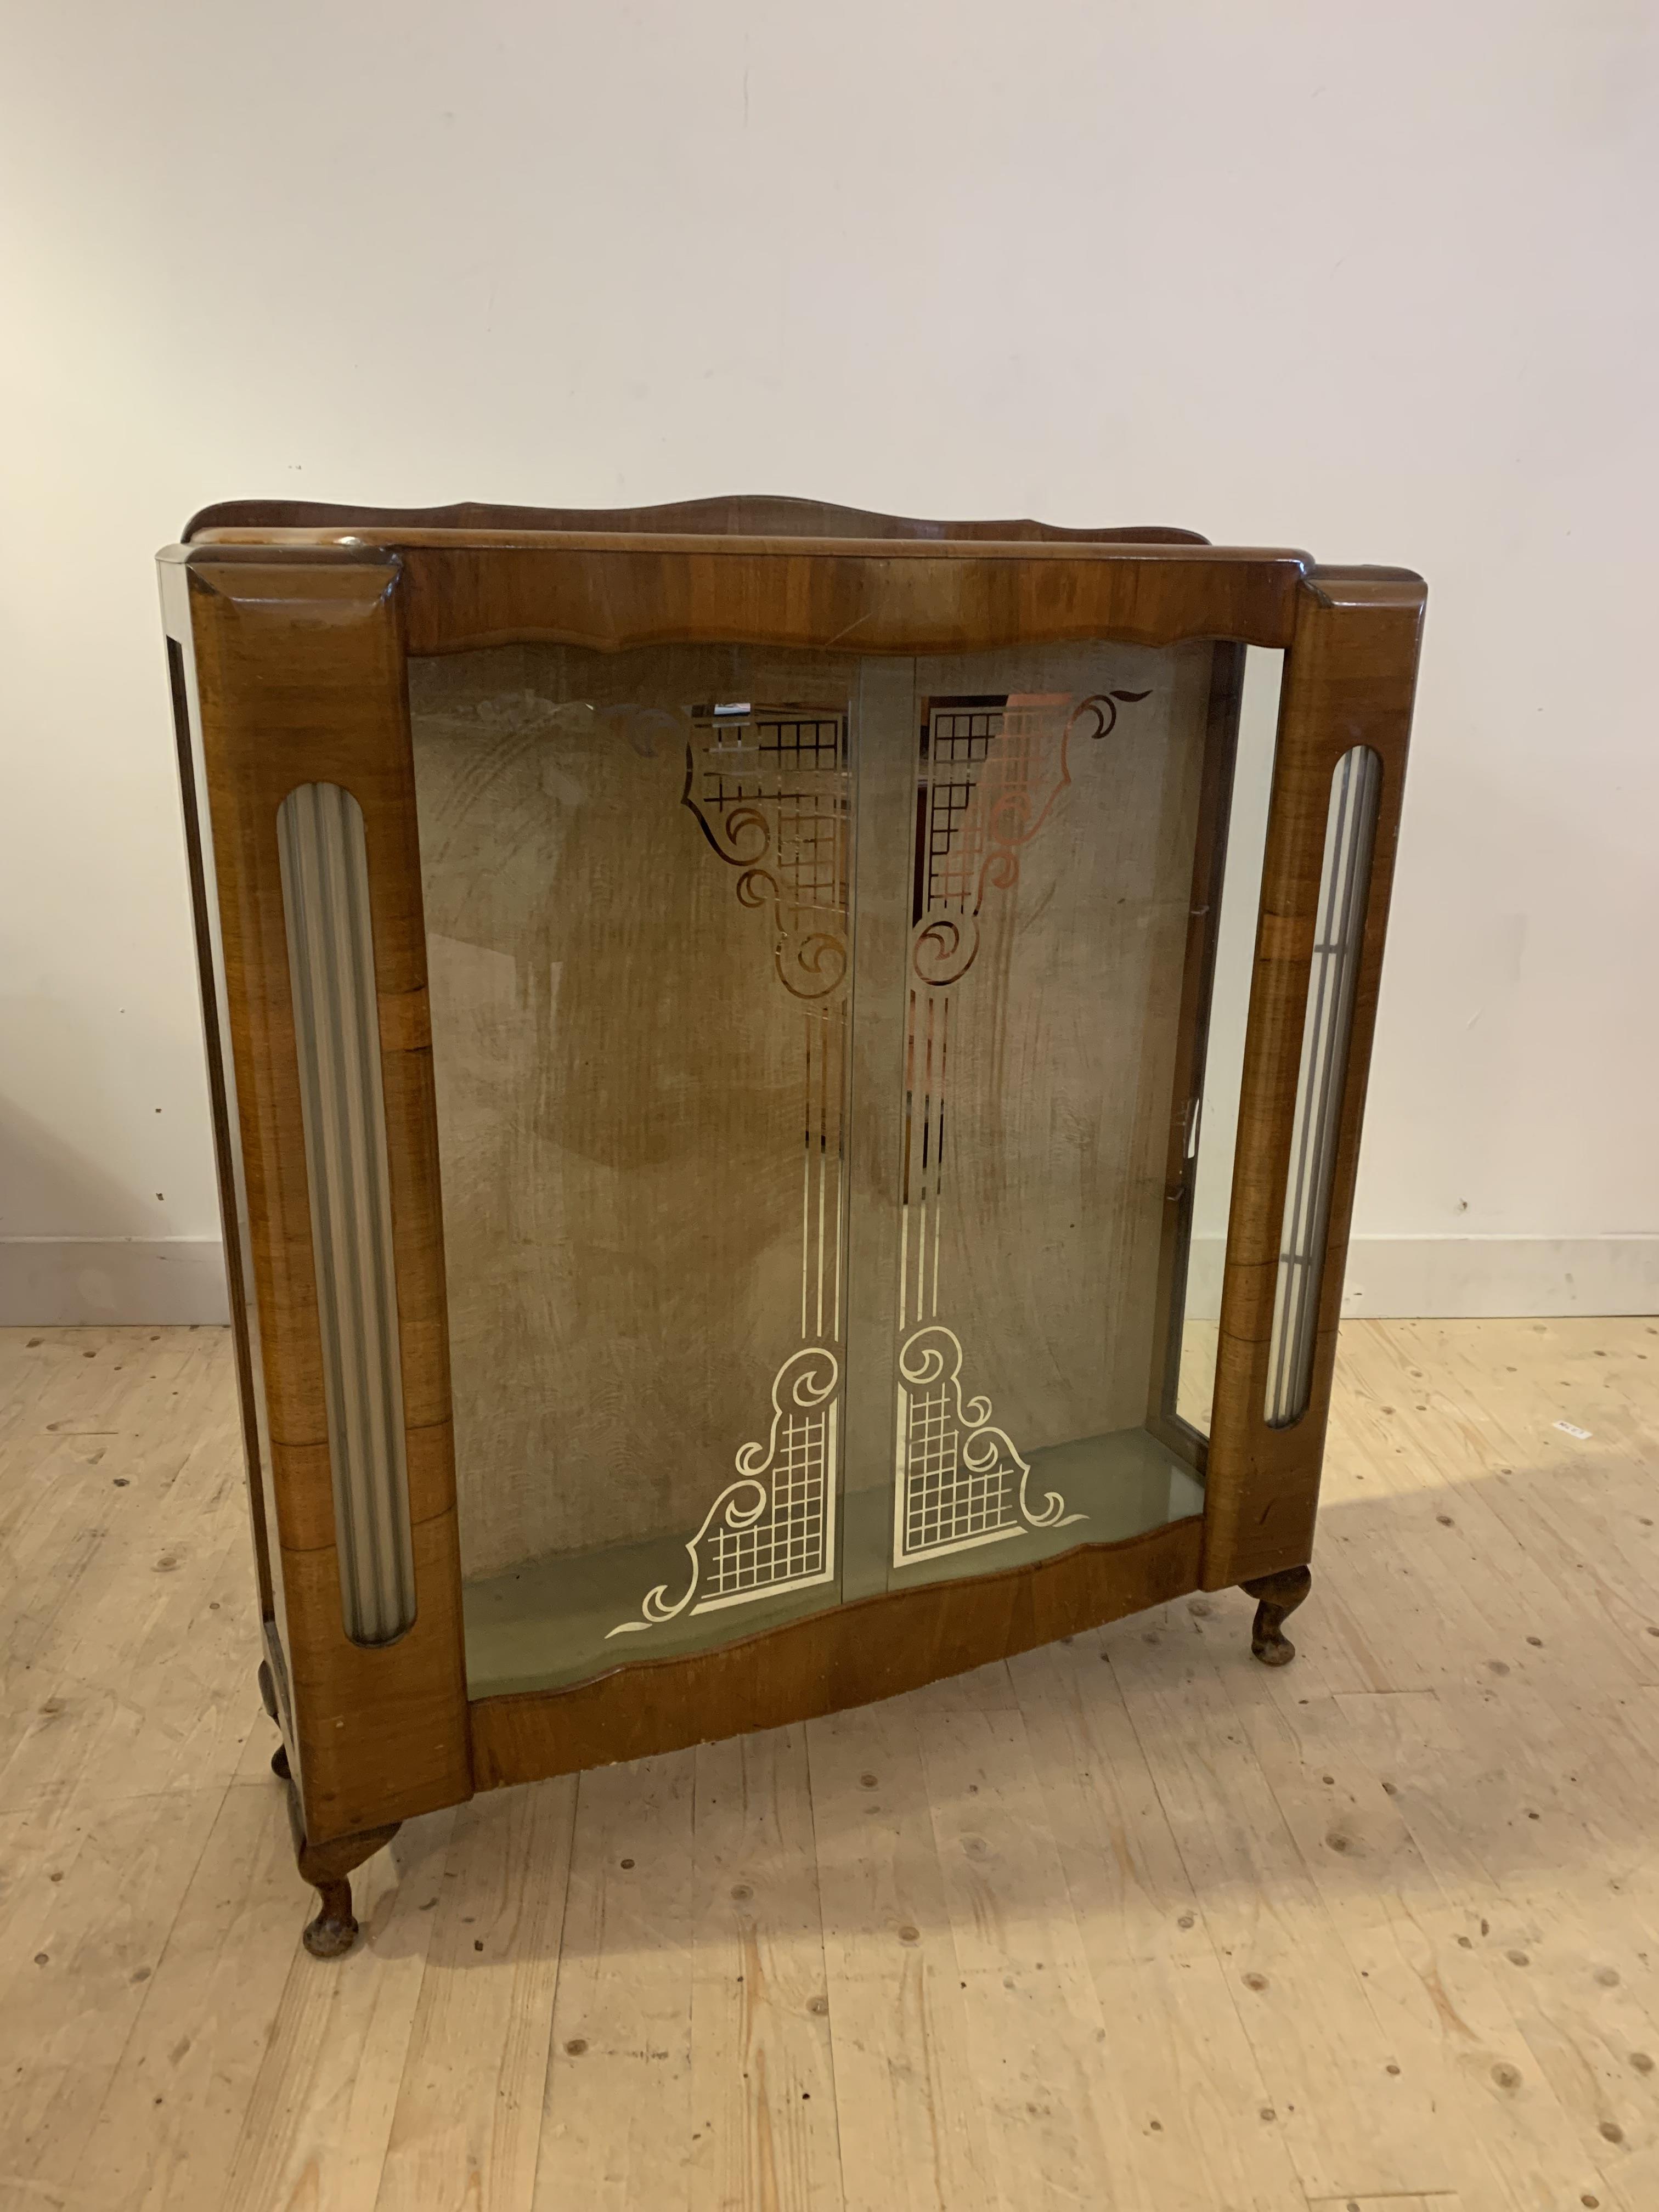 An Art Deco period walnut vennered display cabinet, with sliding glass doors enclosing two